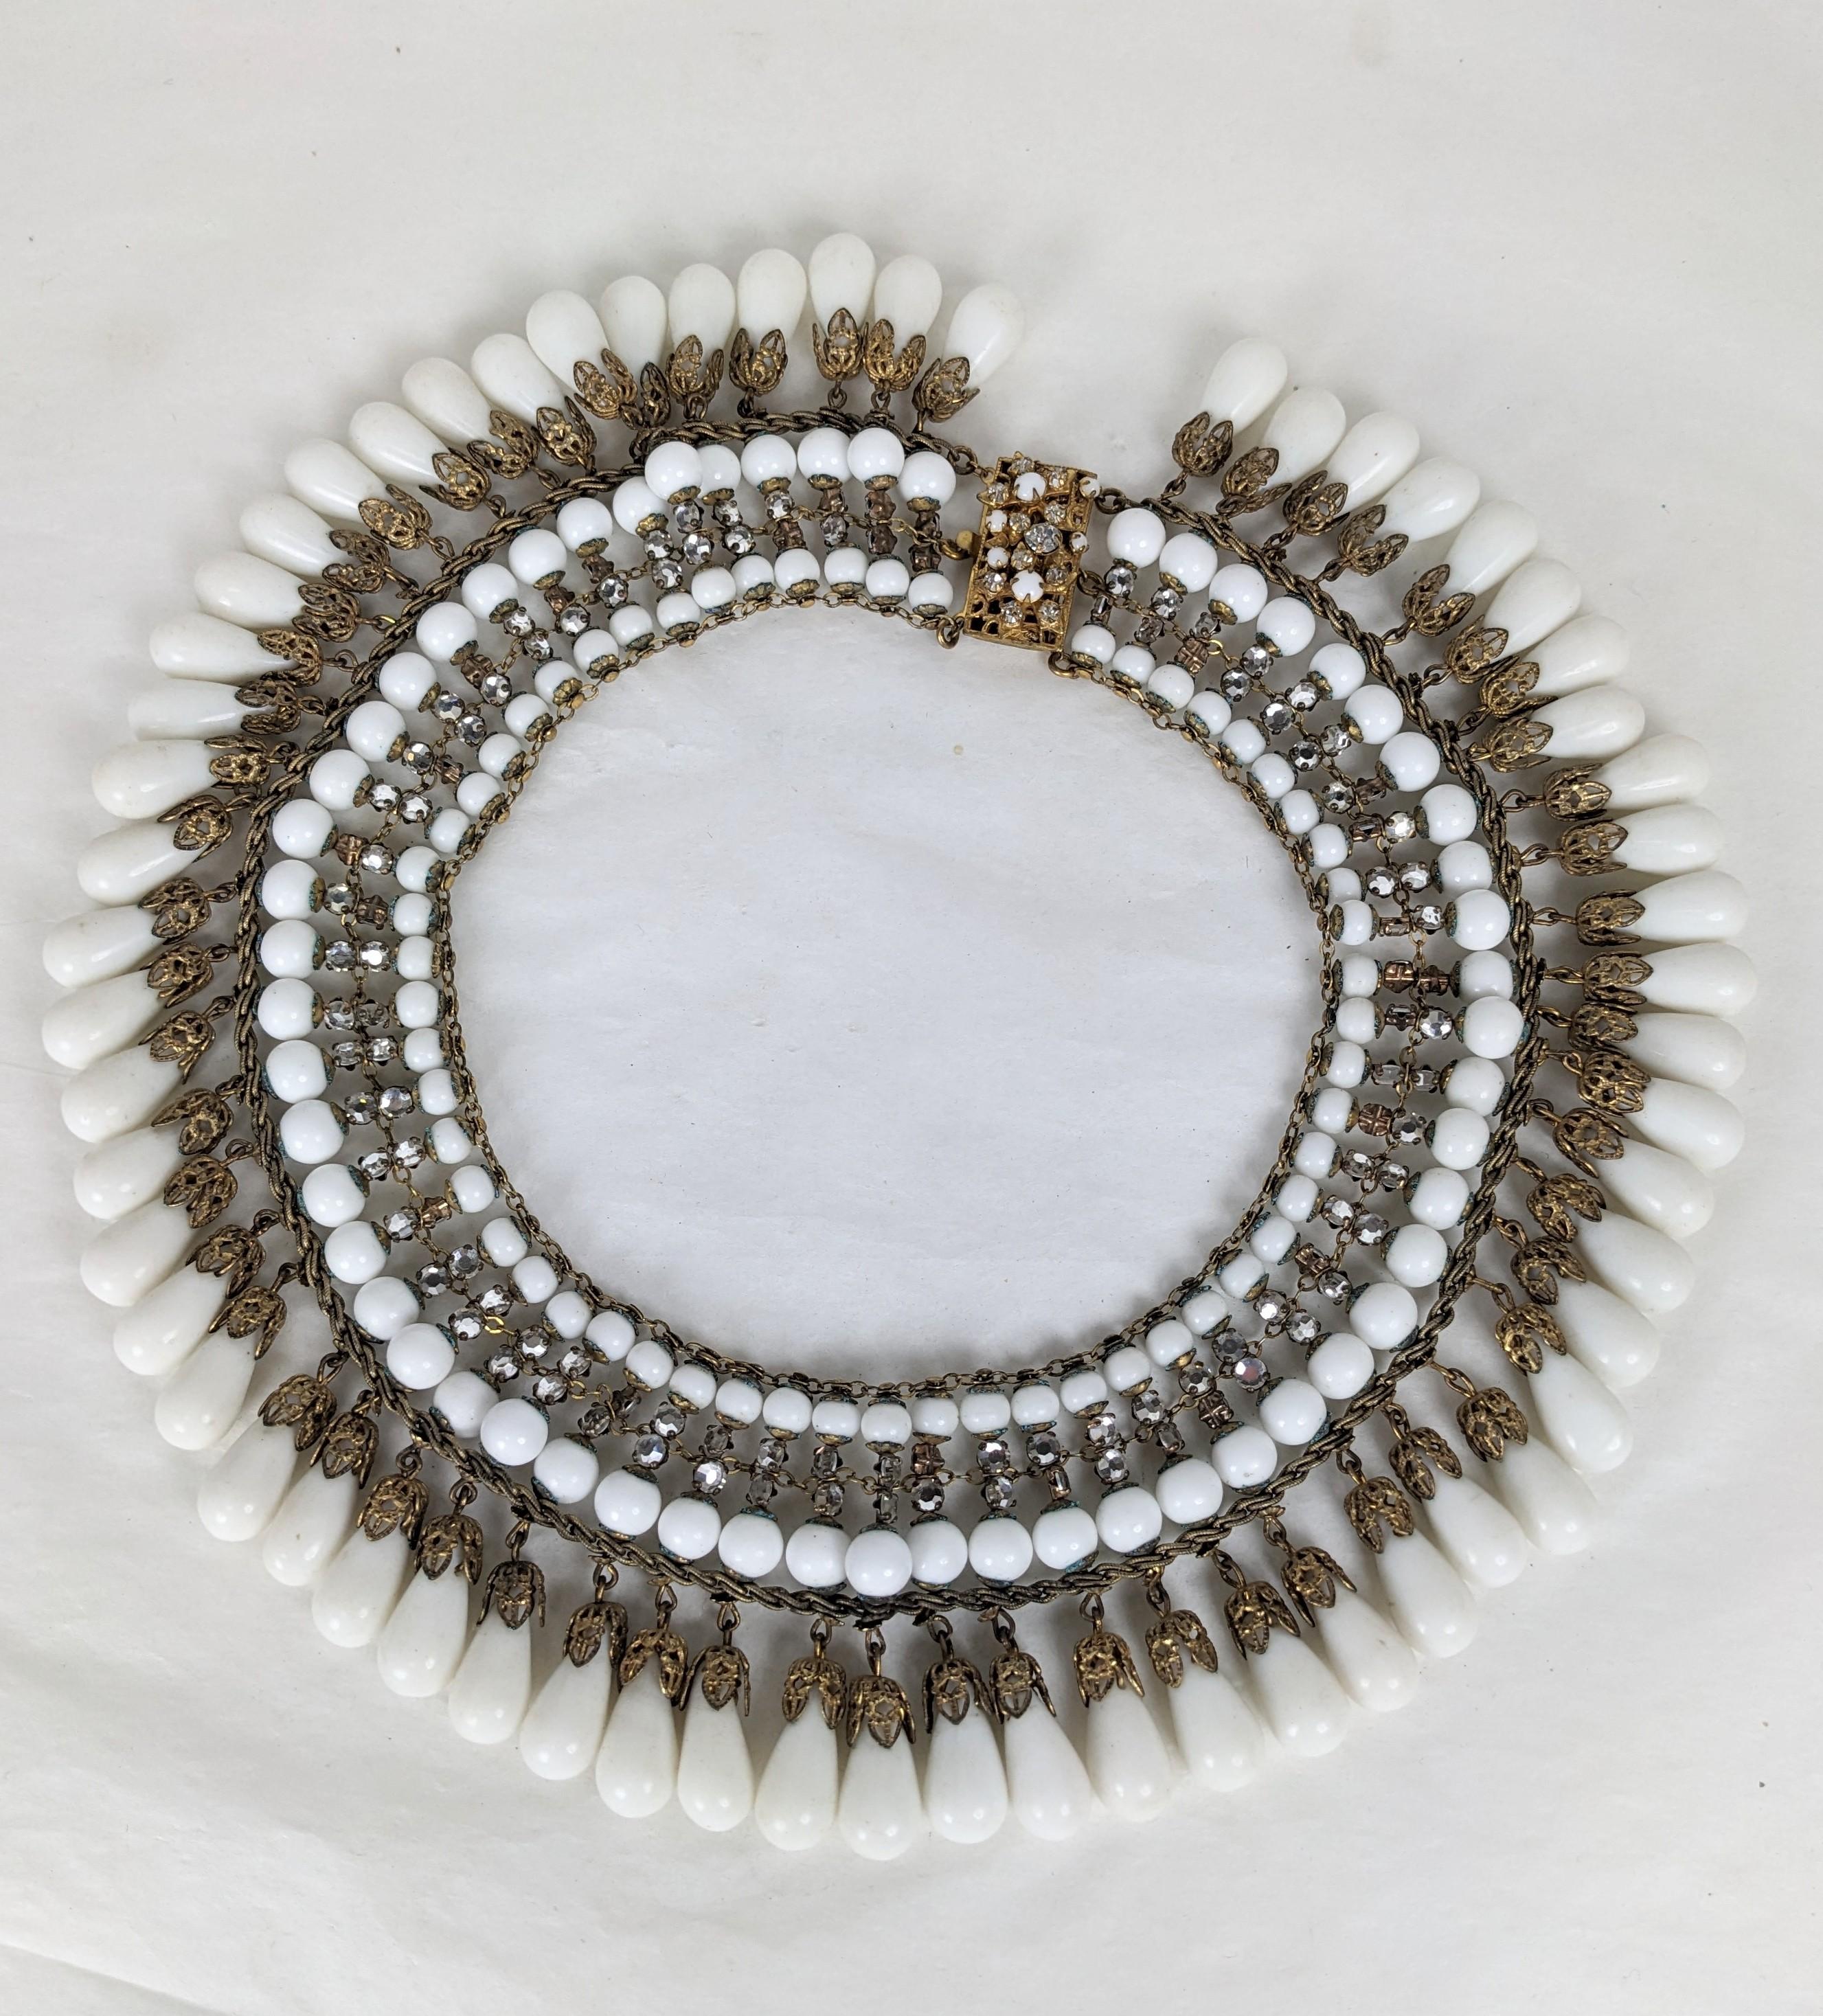 Impressive, Rare Miriam Haskell Milk Glass Pave Collar from the 1940's. Large scale with elaborate construction with hundreds of hand sewn rose montee crystals set on bars with gilt filigrees and milk glass pate de verre hand made beads. Clasp of